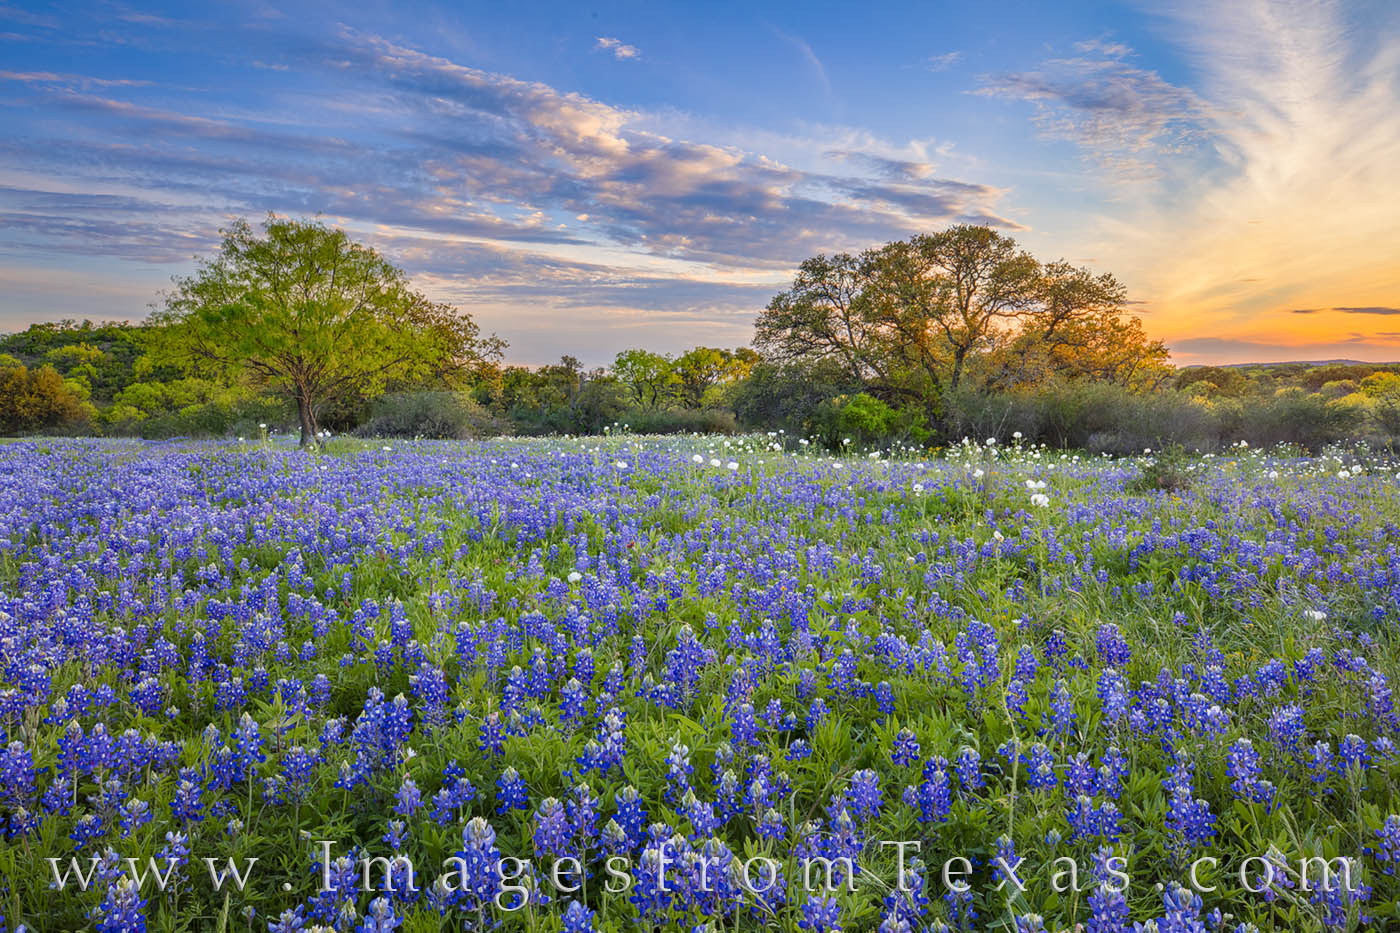 The spring of 2020 was pretty sparse for bluebonnets, but there were a few spots to be found in the hill country. One of the...